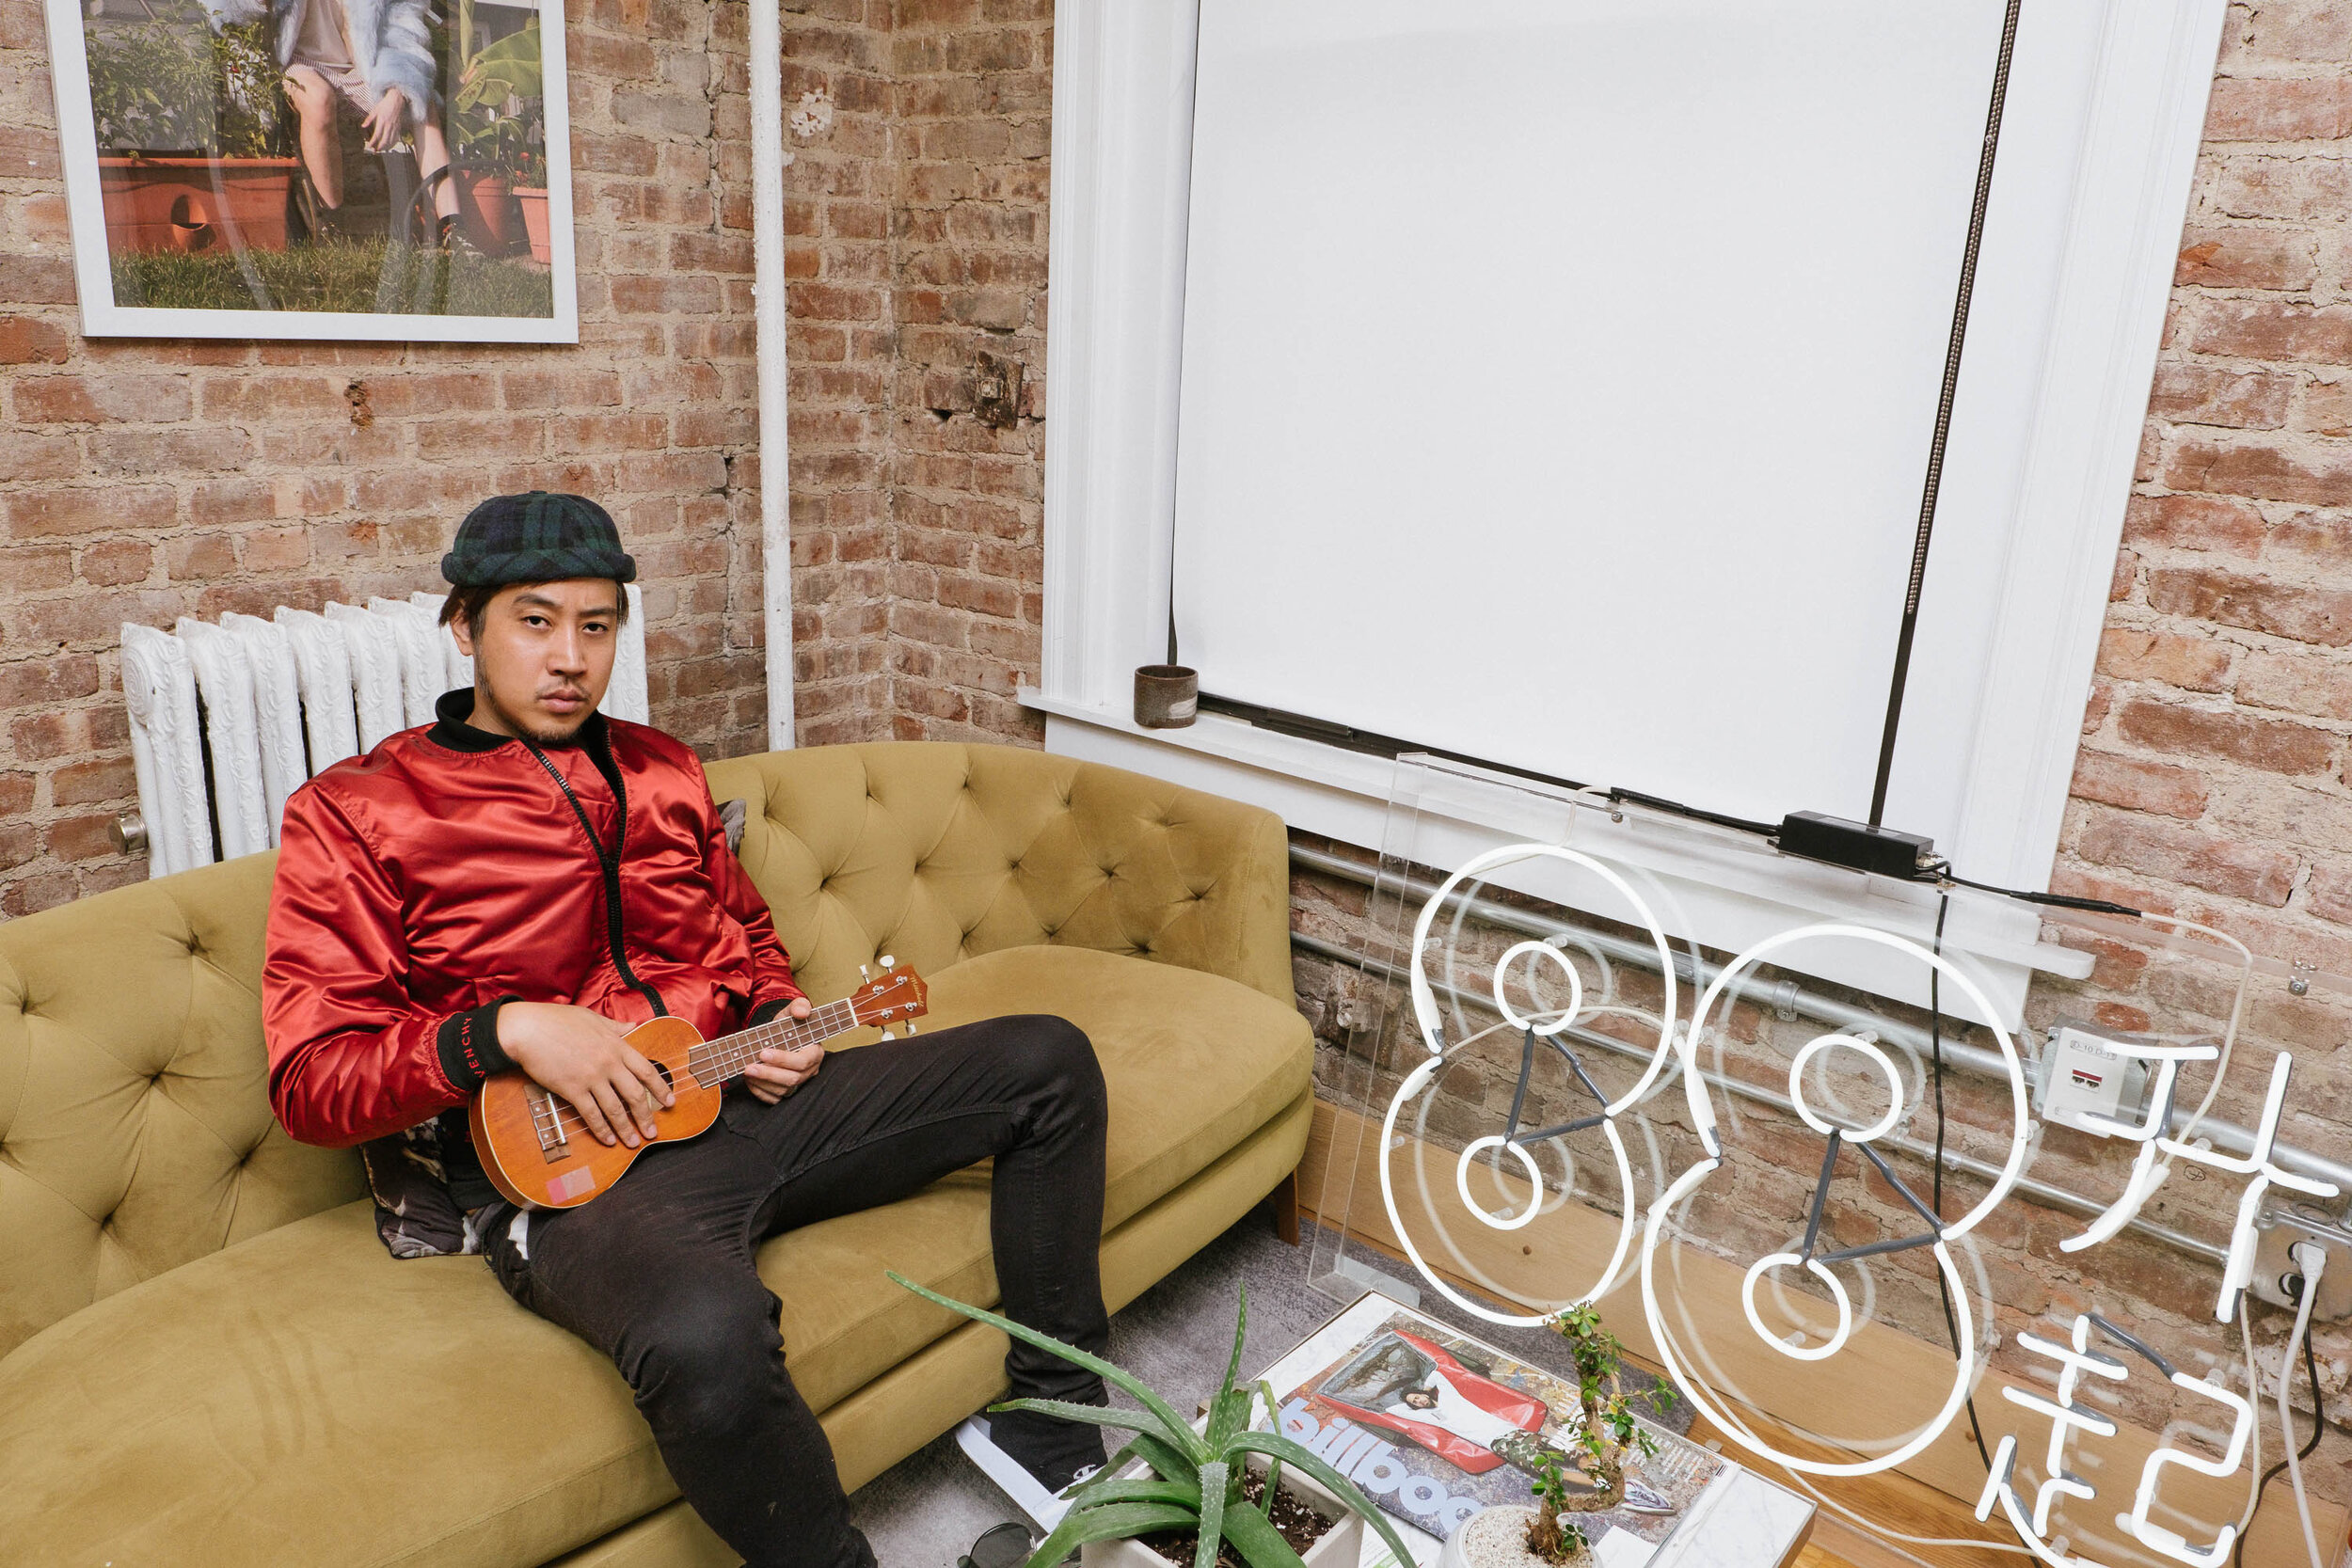  “The whole genesis of 88Rising came from me and my friends hanging out," 88rising founder and CEO Sean Miyashiro said from his New York City office. "I was fortunate enough to hang out with a lot of different creators and people doing cool things th